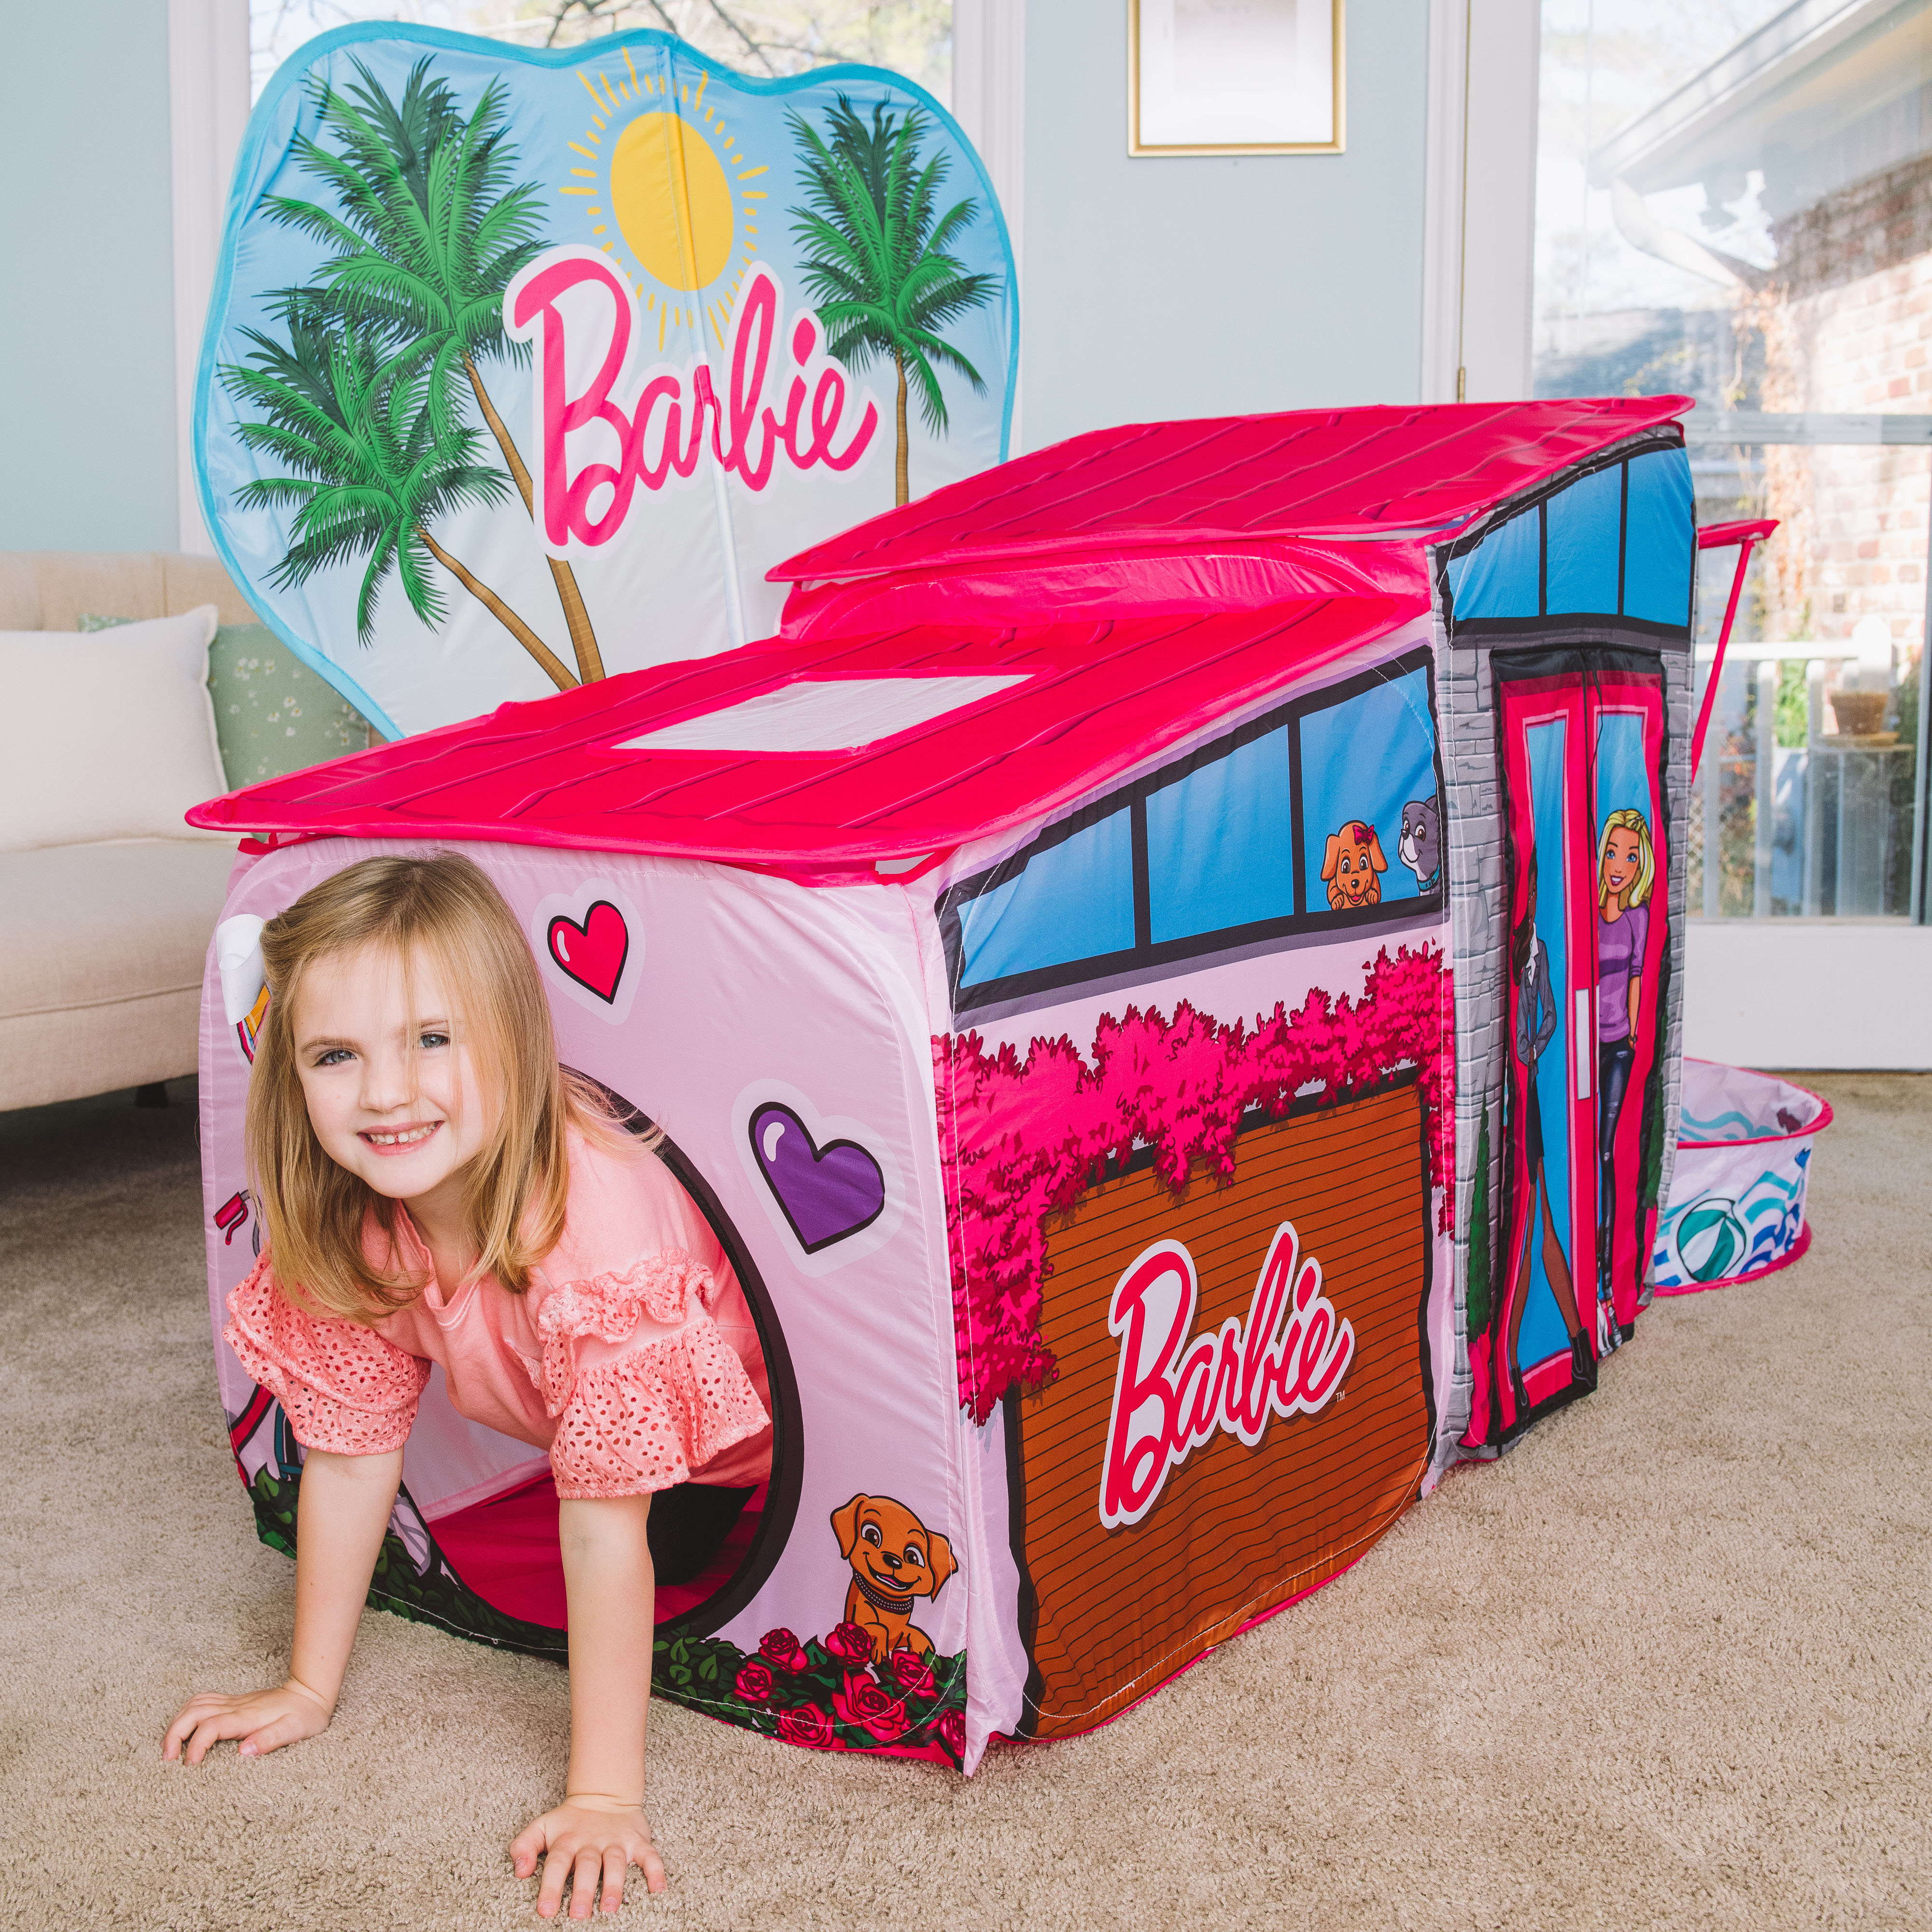 Barbie Dreamhouse 7' Pop-Up Play Tent, Easy Assembly Includes 20 Plastic Balls, Children Ages 3+ - image 5 of 10